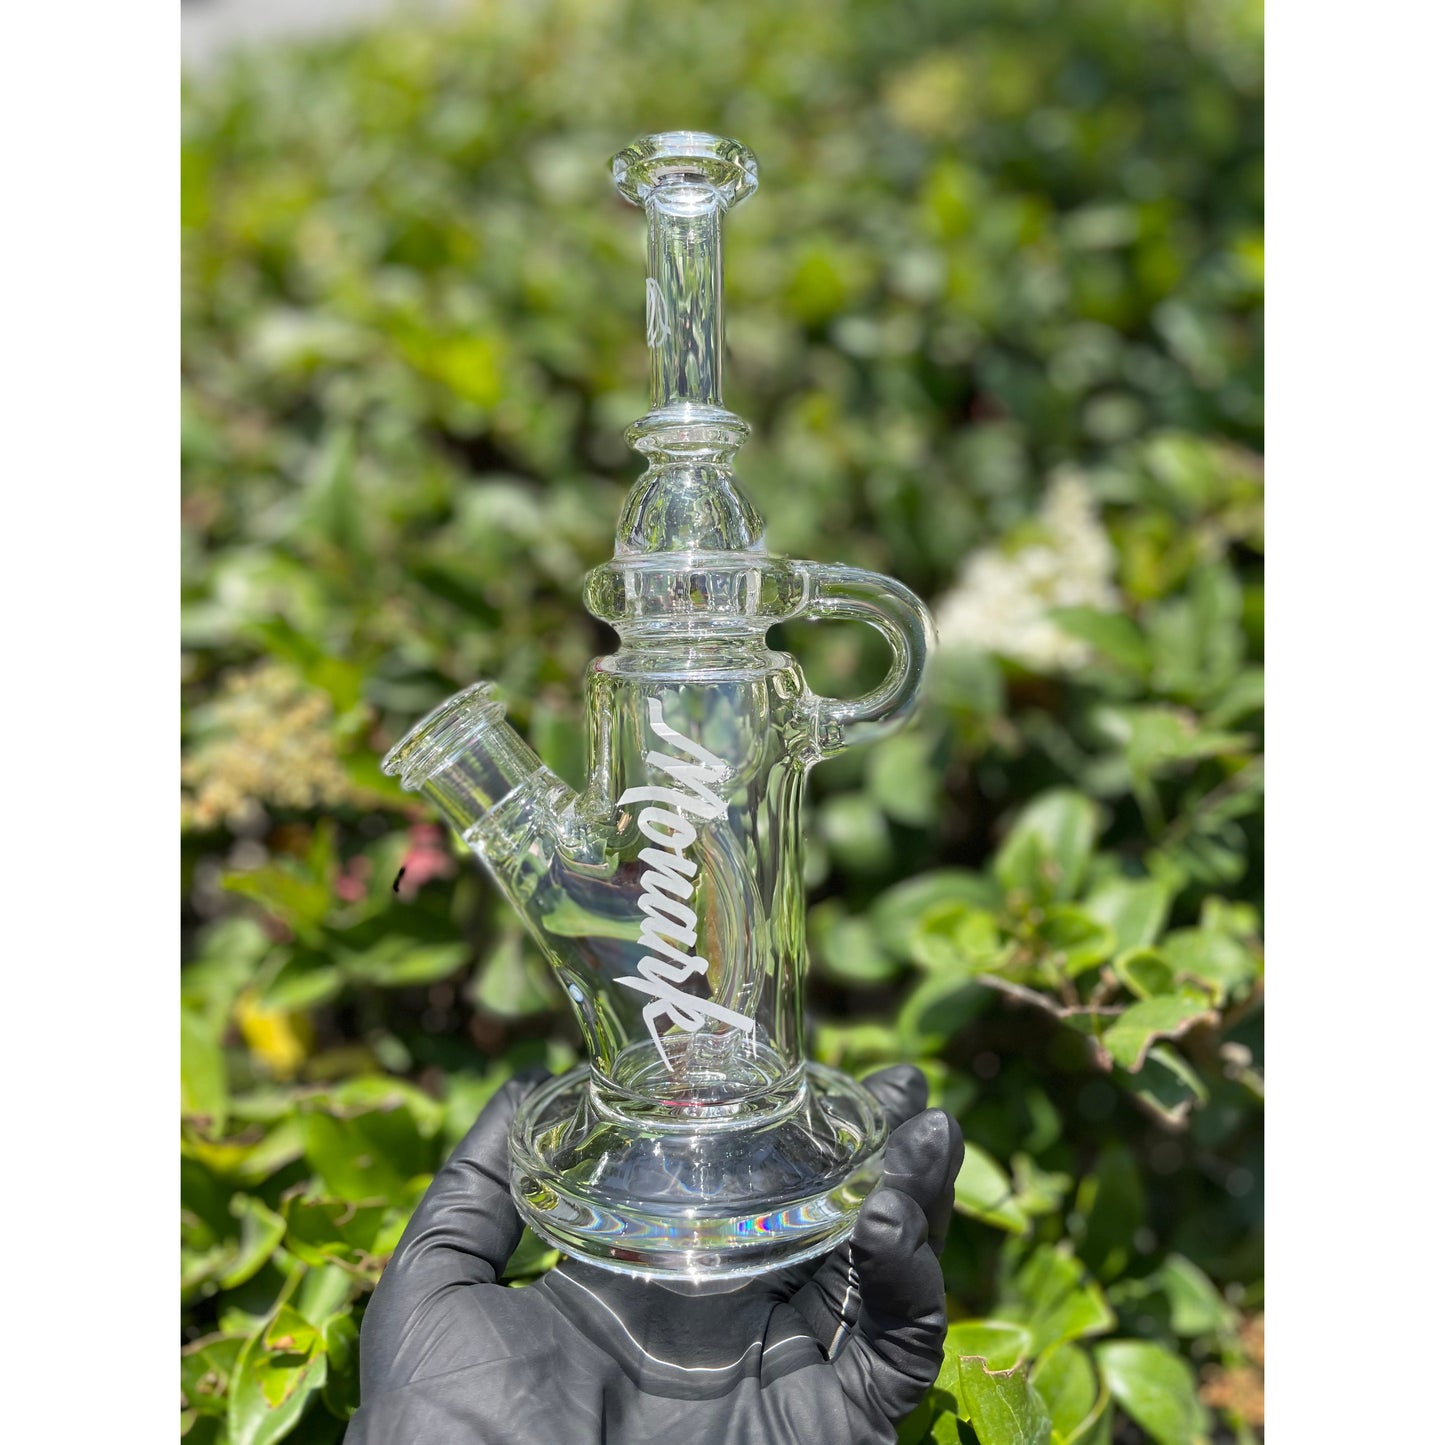 New Monark Insycler Dab Rig with 14mm male 45 degree flat top banger.